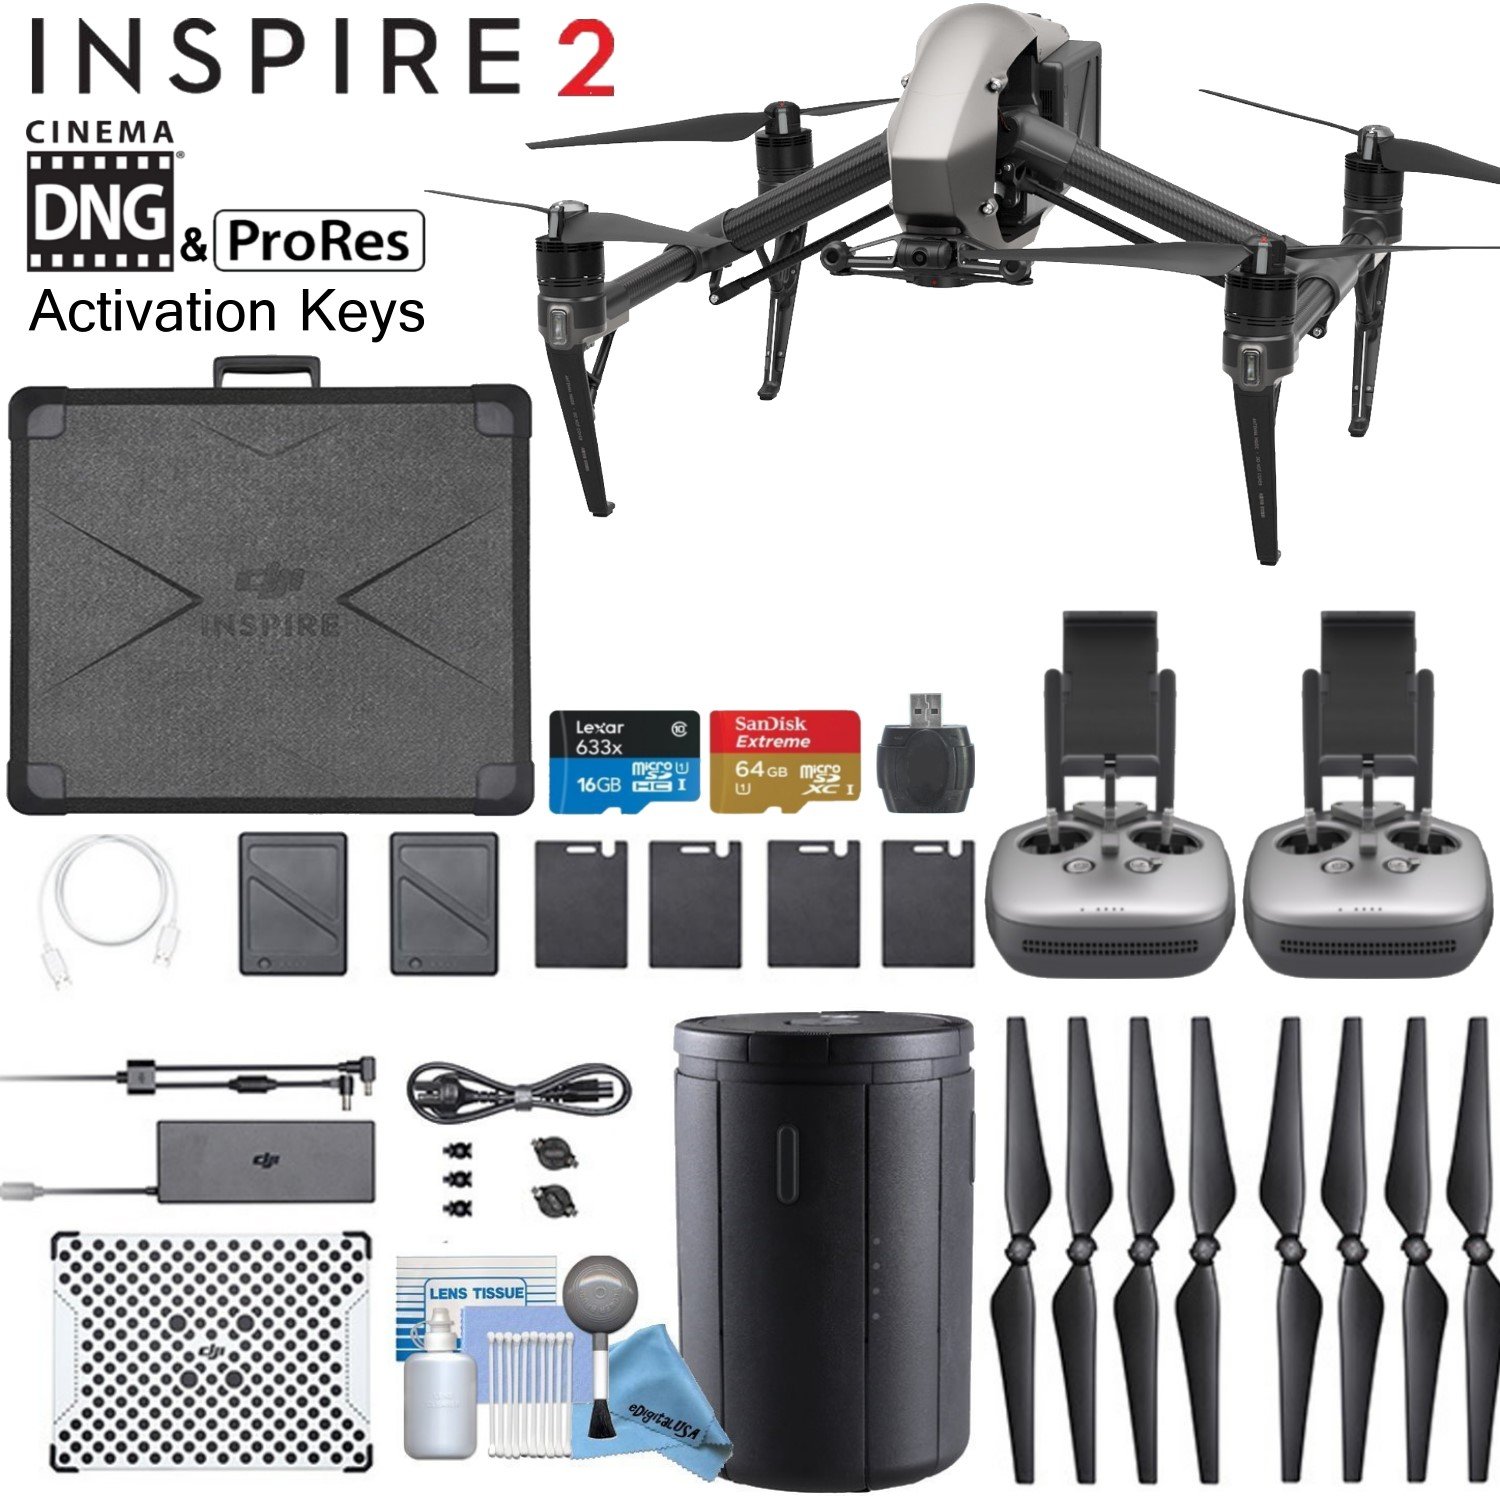 DJI Inspire 2 Quadcopter Kit with Zenmuse X4S, Apple Res, Cinema DNG